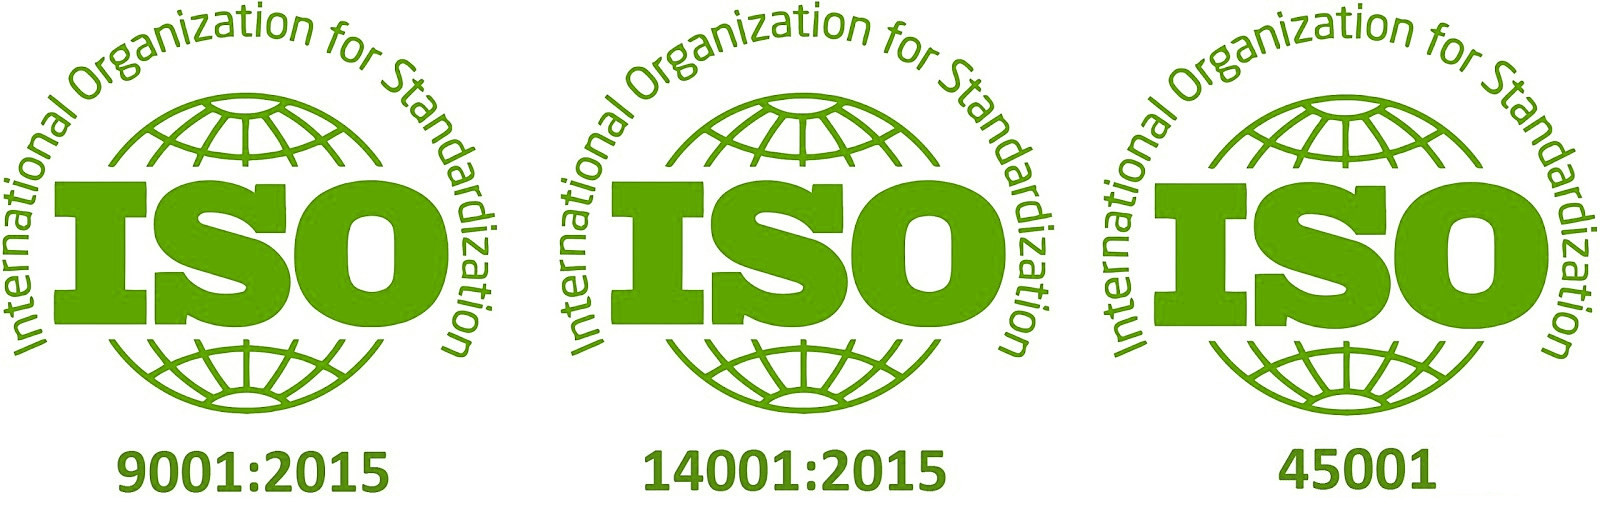 iso standards bambus solutions